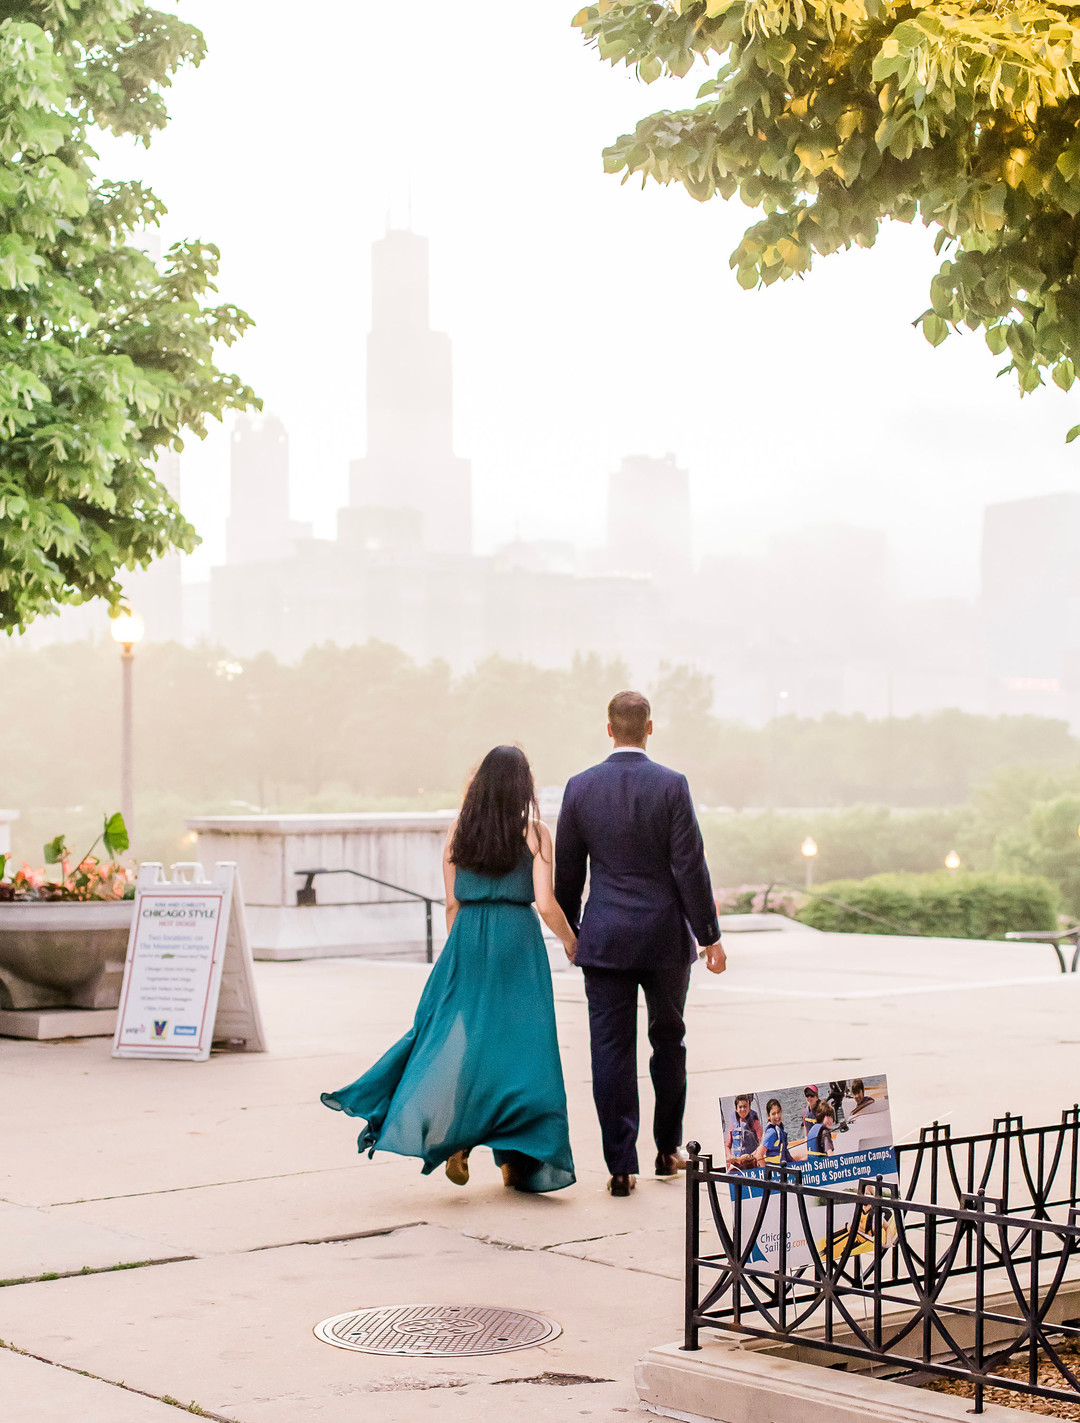 Chicago engagement session inspiration featured on CHI thee WED. See more engagement session ideas at CHItheeWED.com!